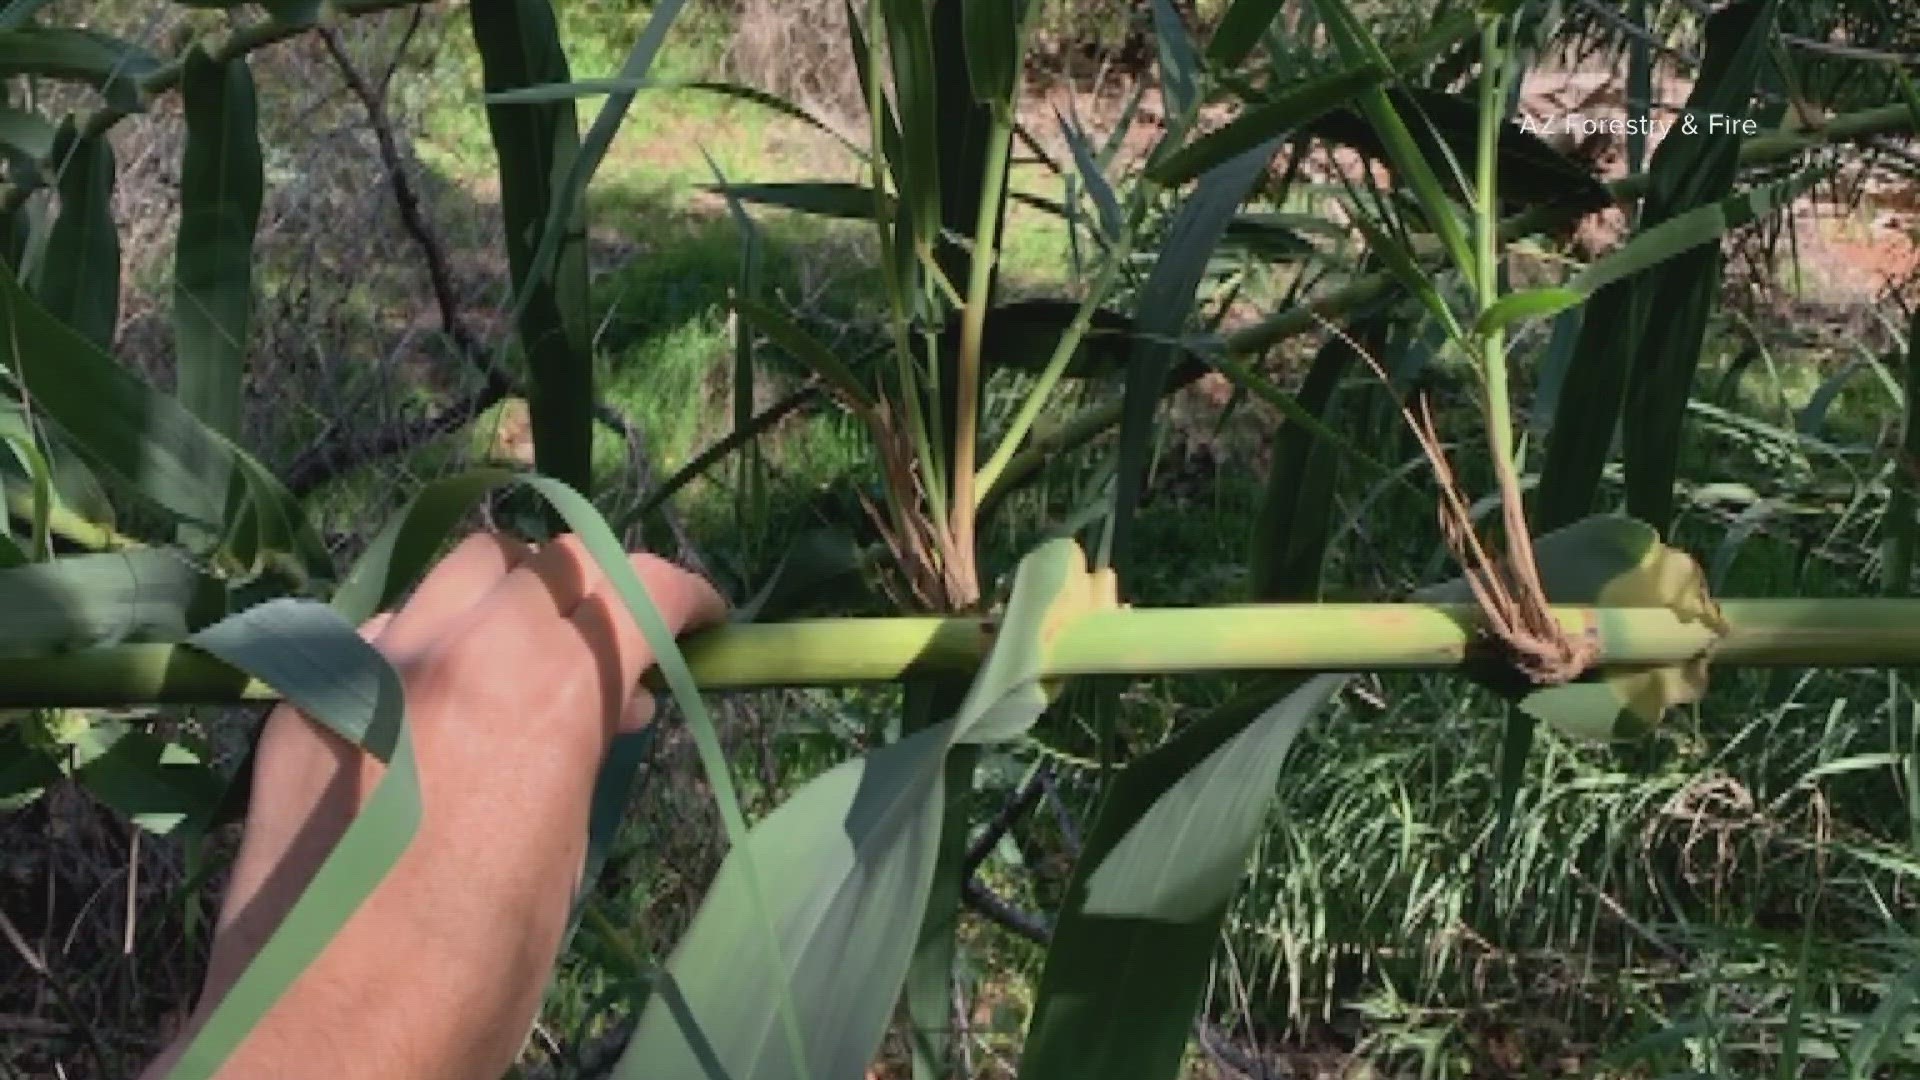 An invasive plant called Arundo can burns hotter and longer and could be trouble for fire seaosn.